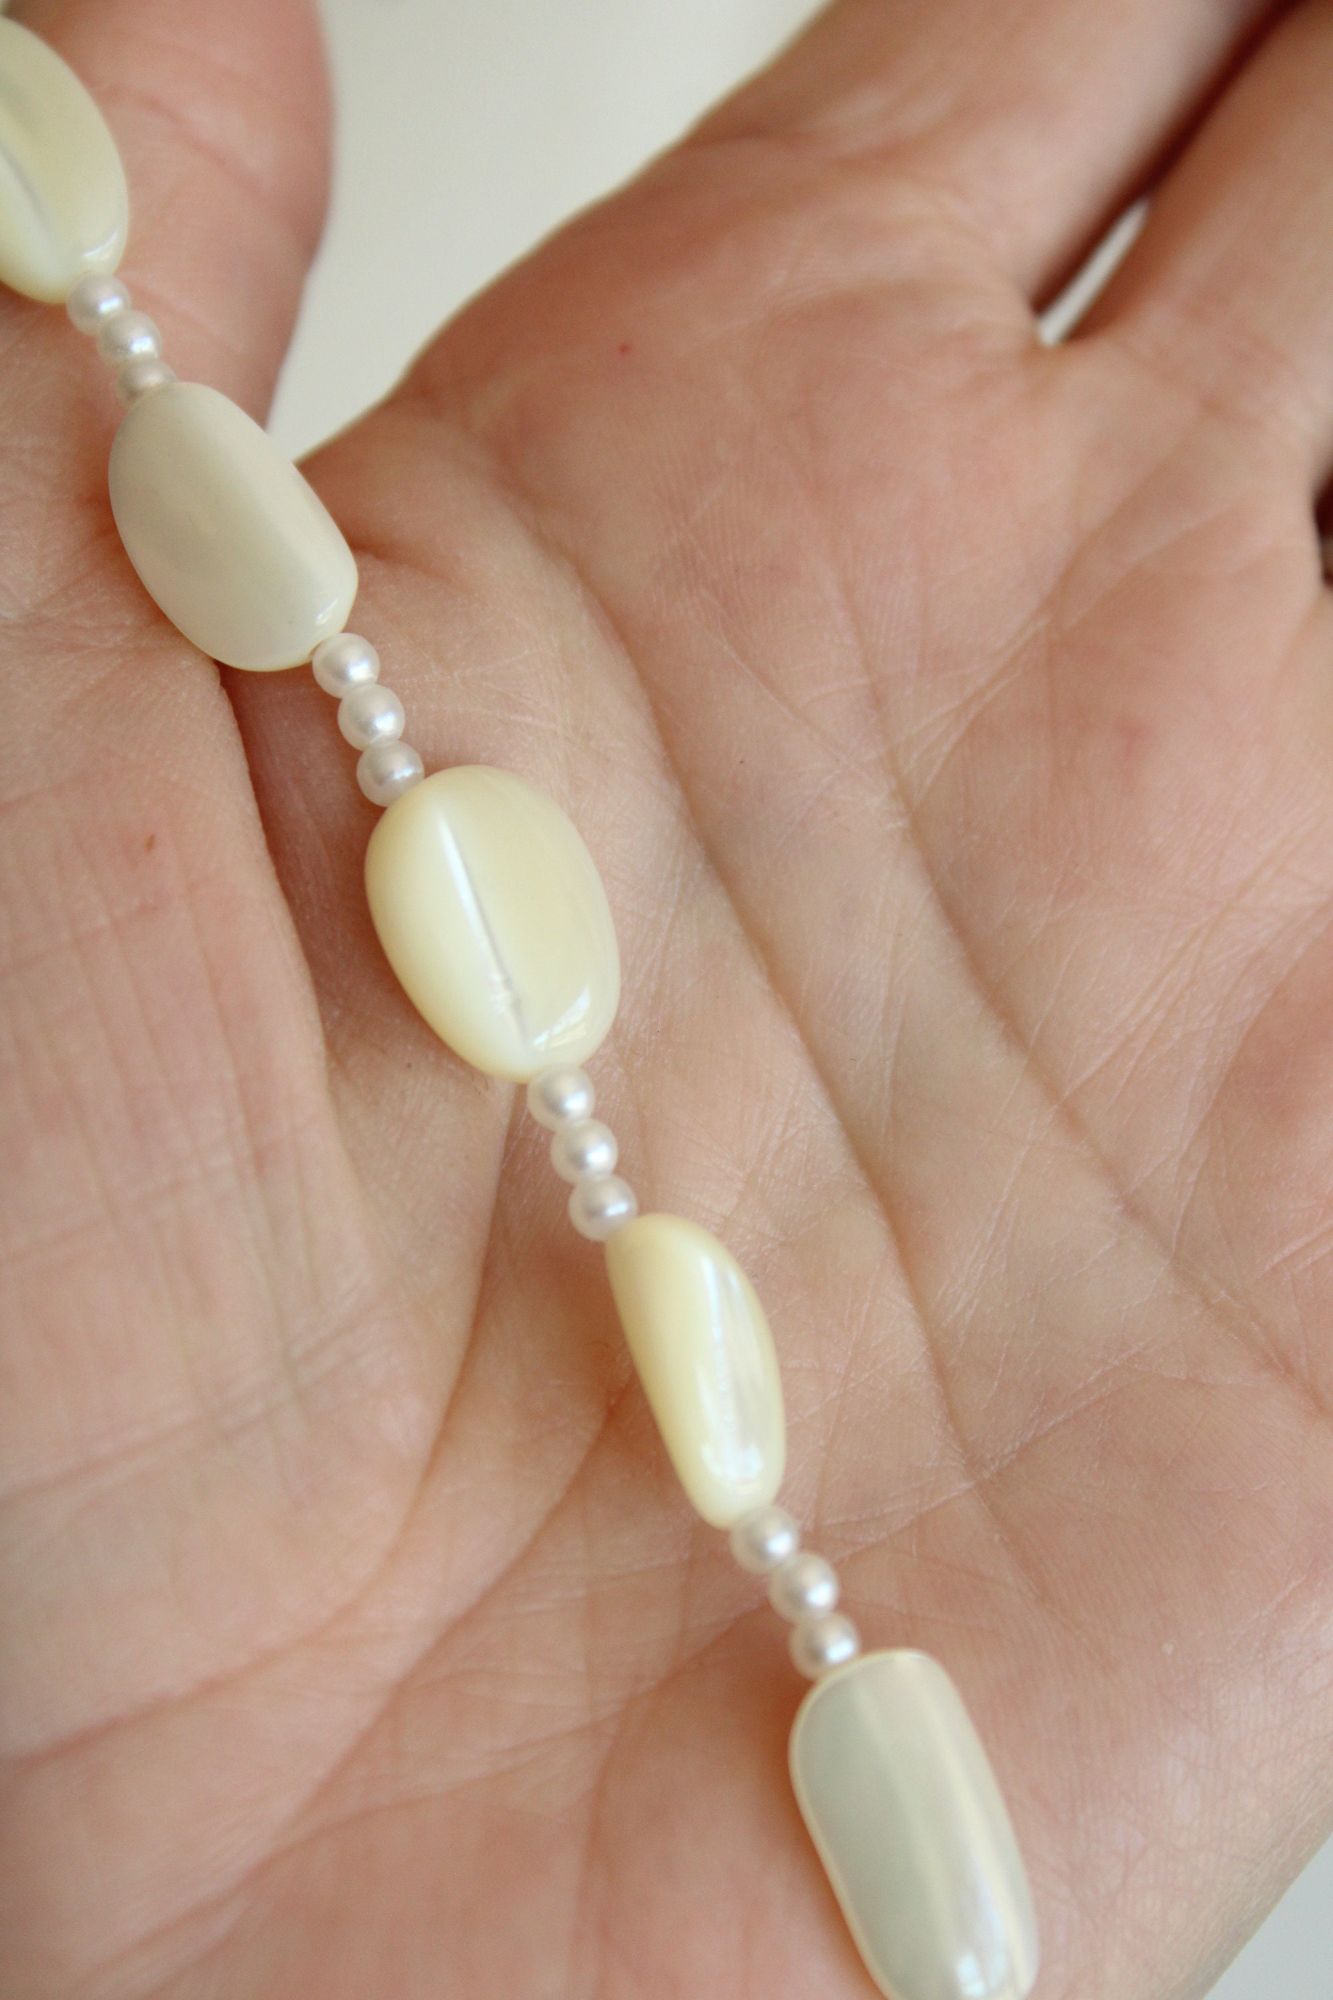 Vintage 1960s Shell or Mother of Pearl Necklace